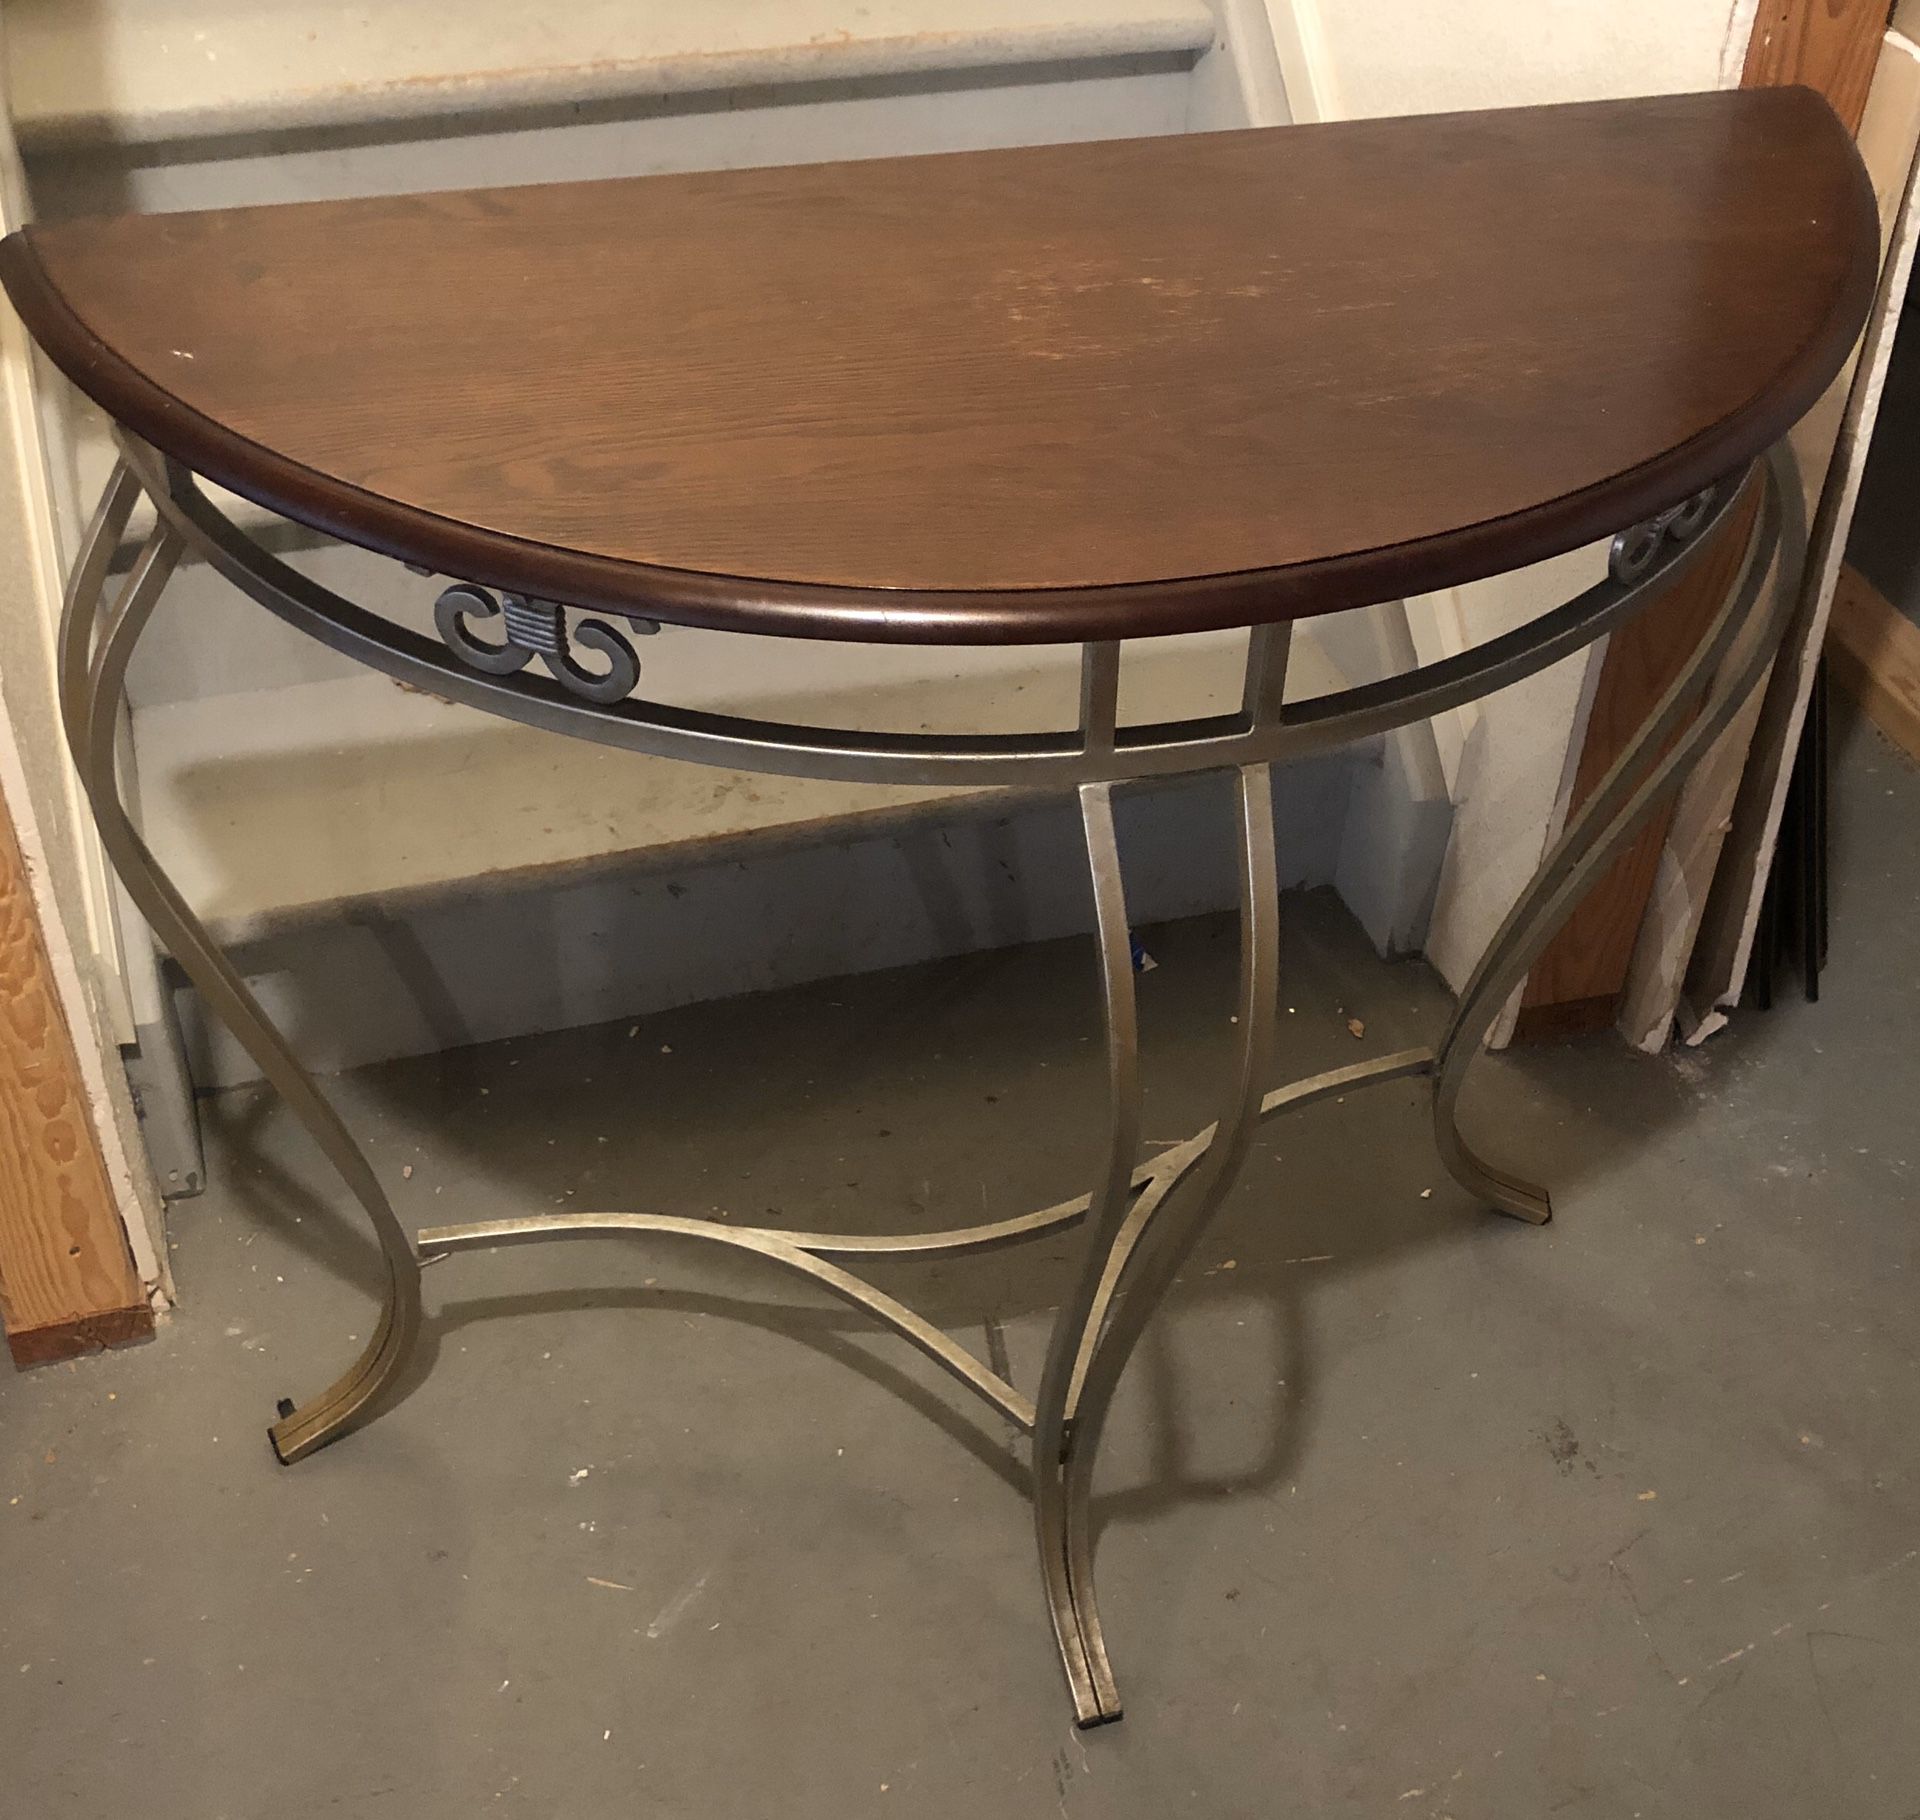 Entry table with mirror ( PENDING PICK UP)